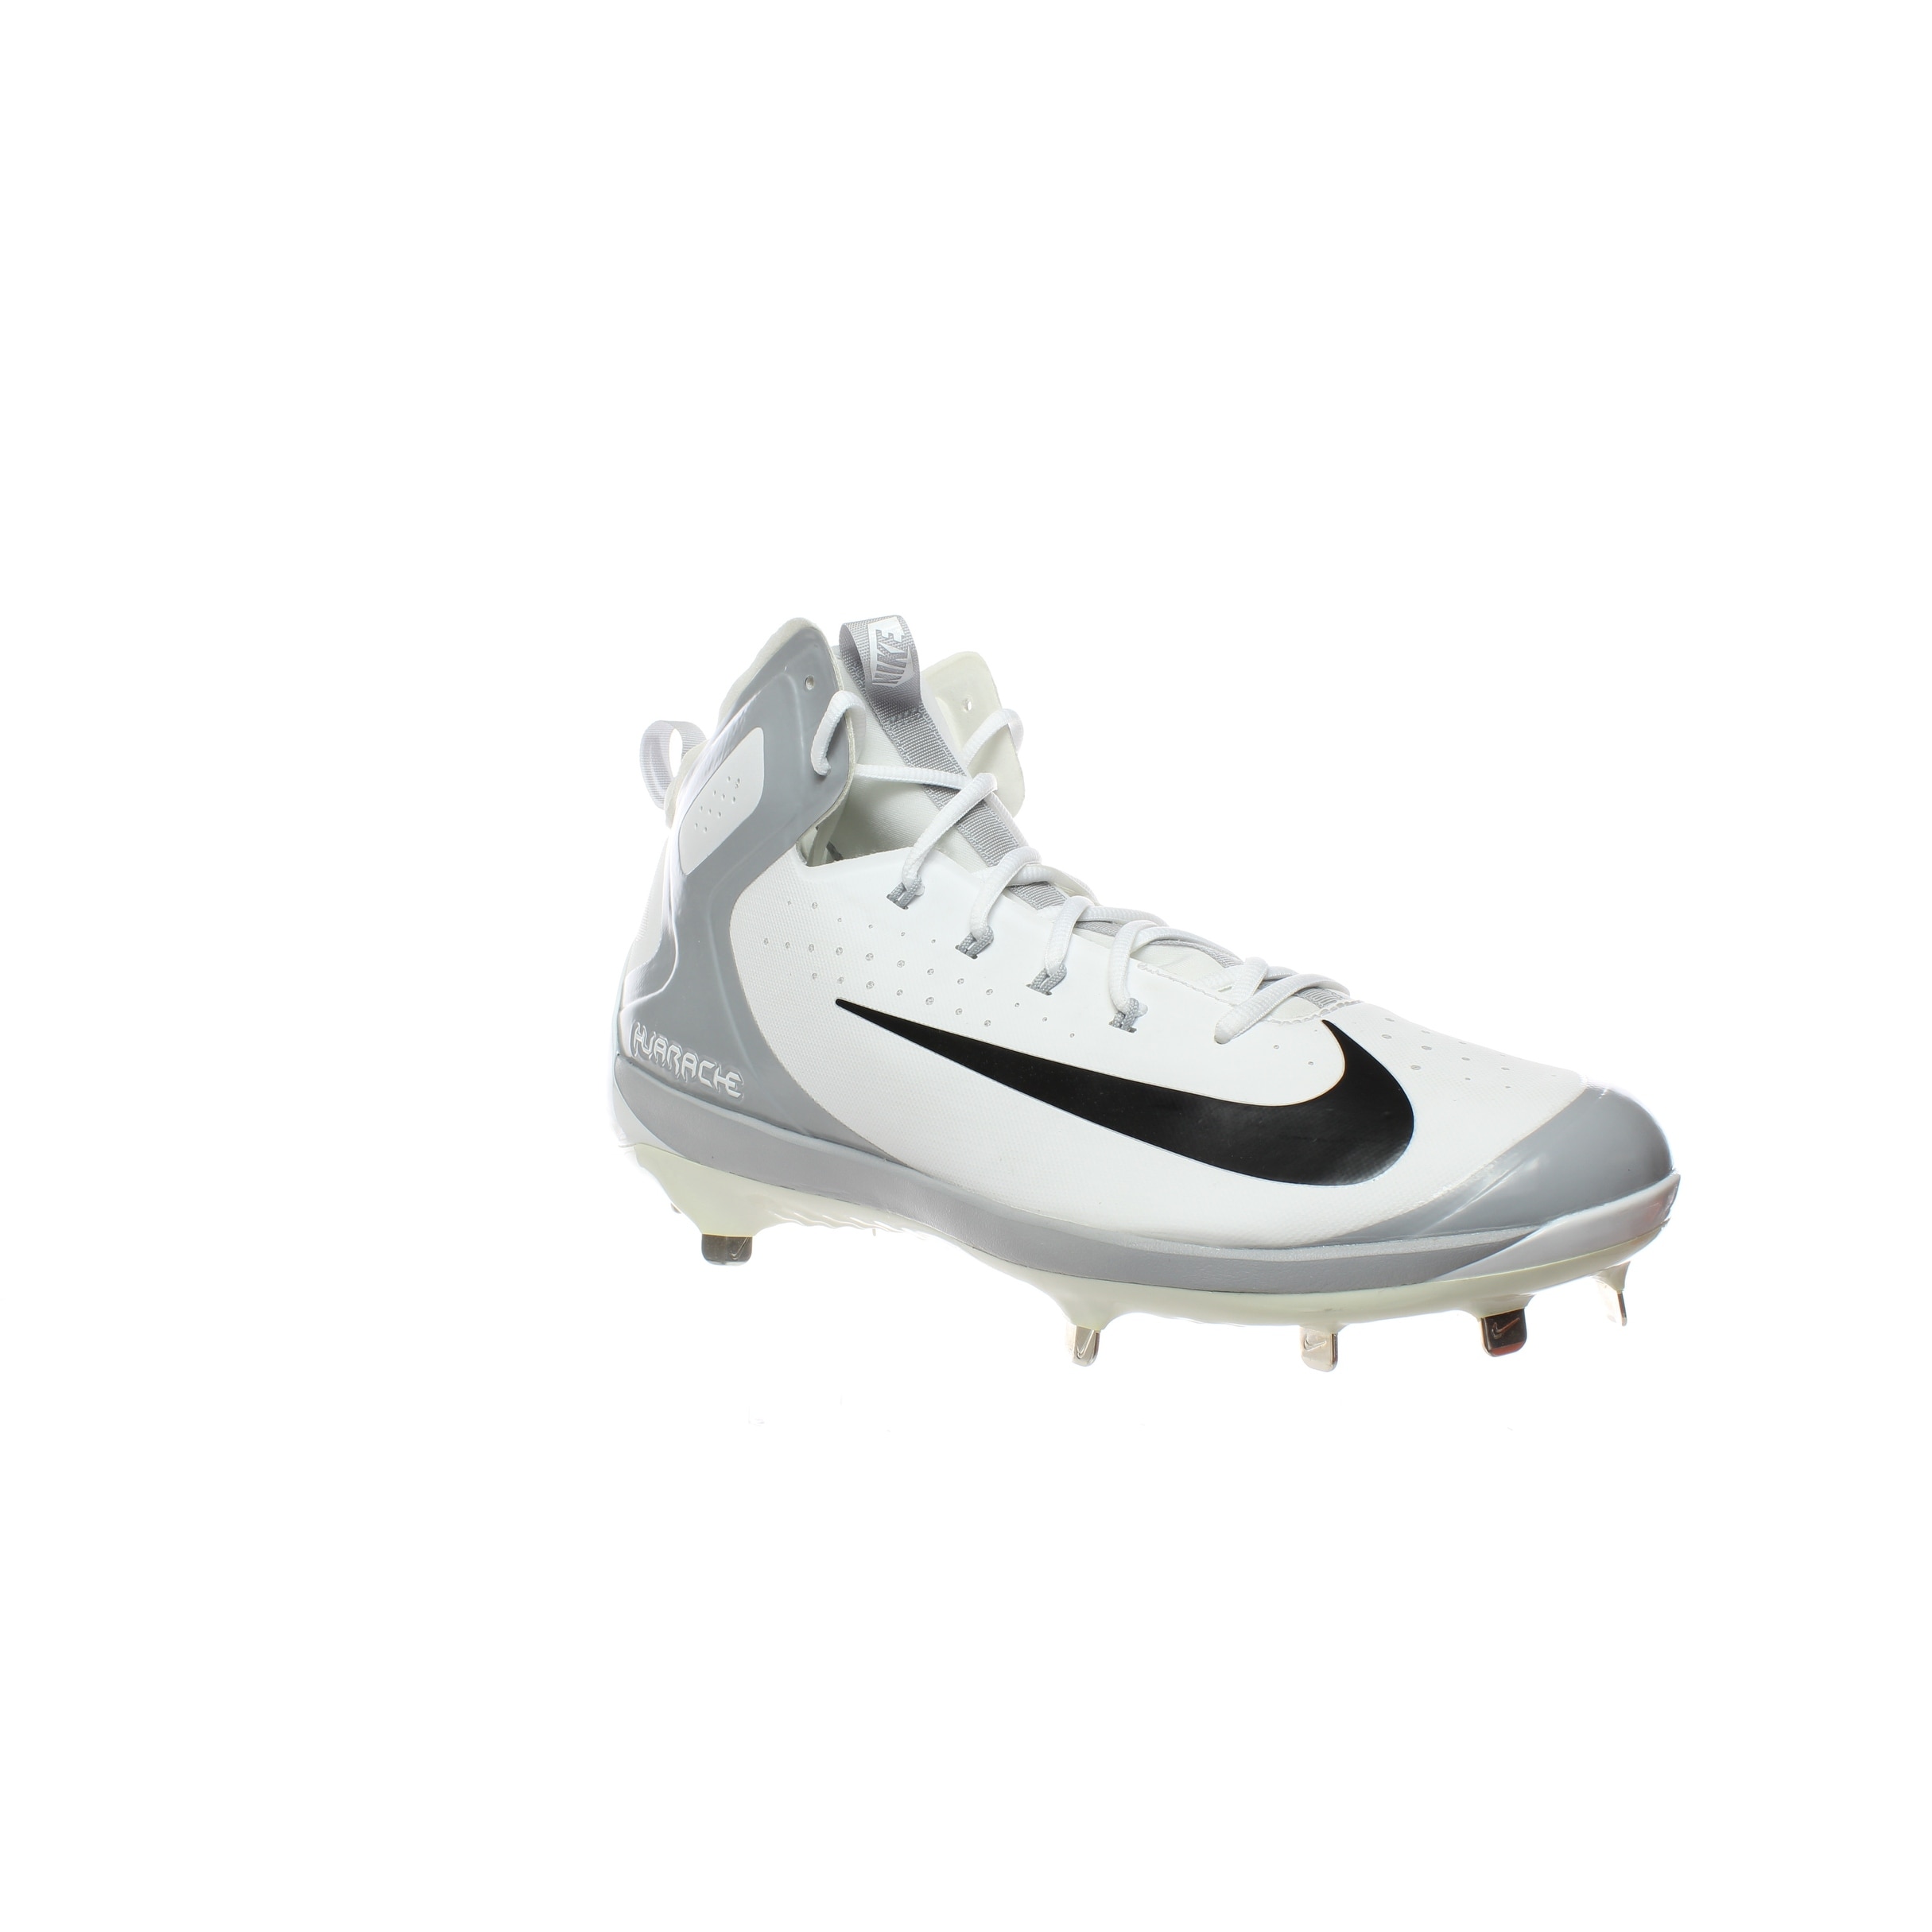 size 14 cleats